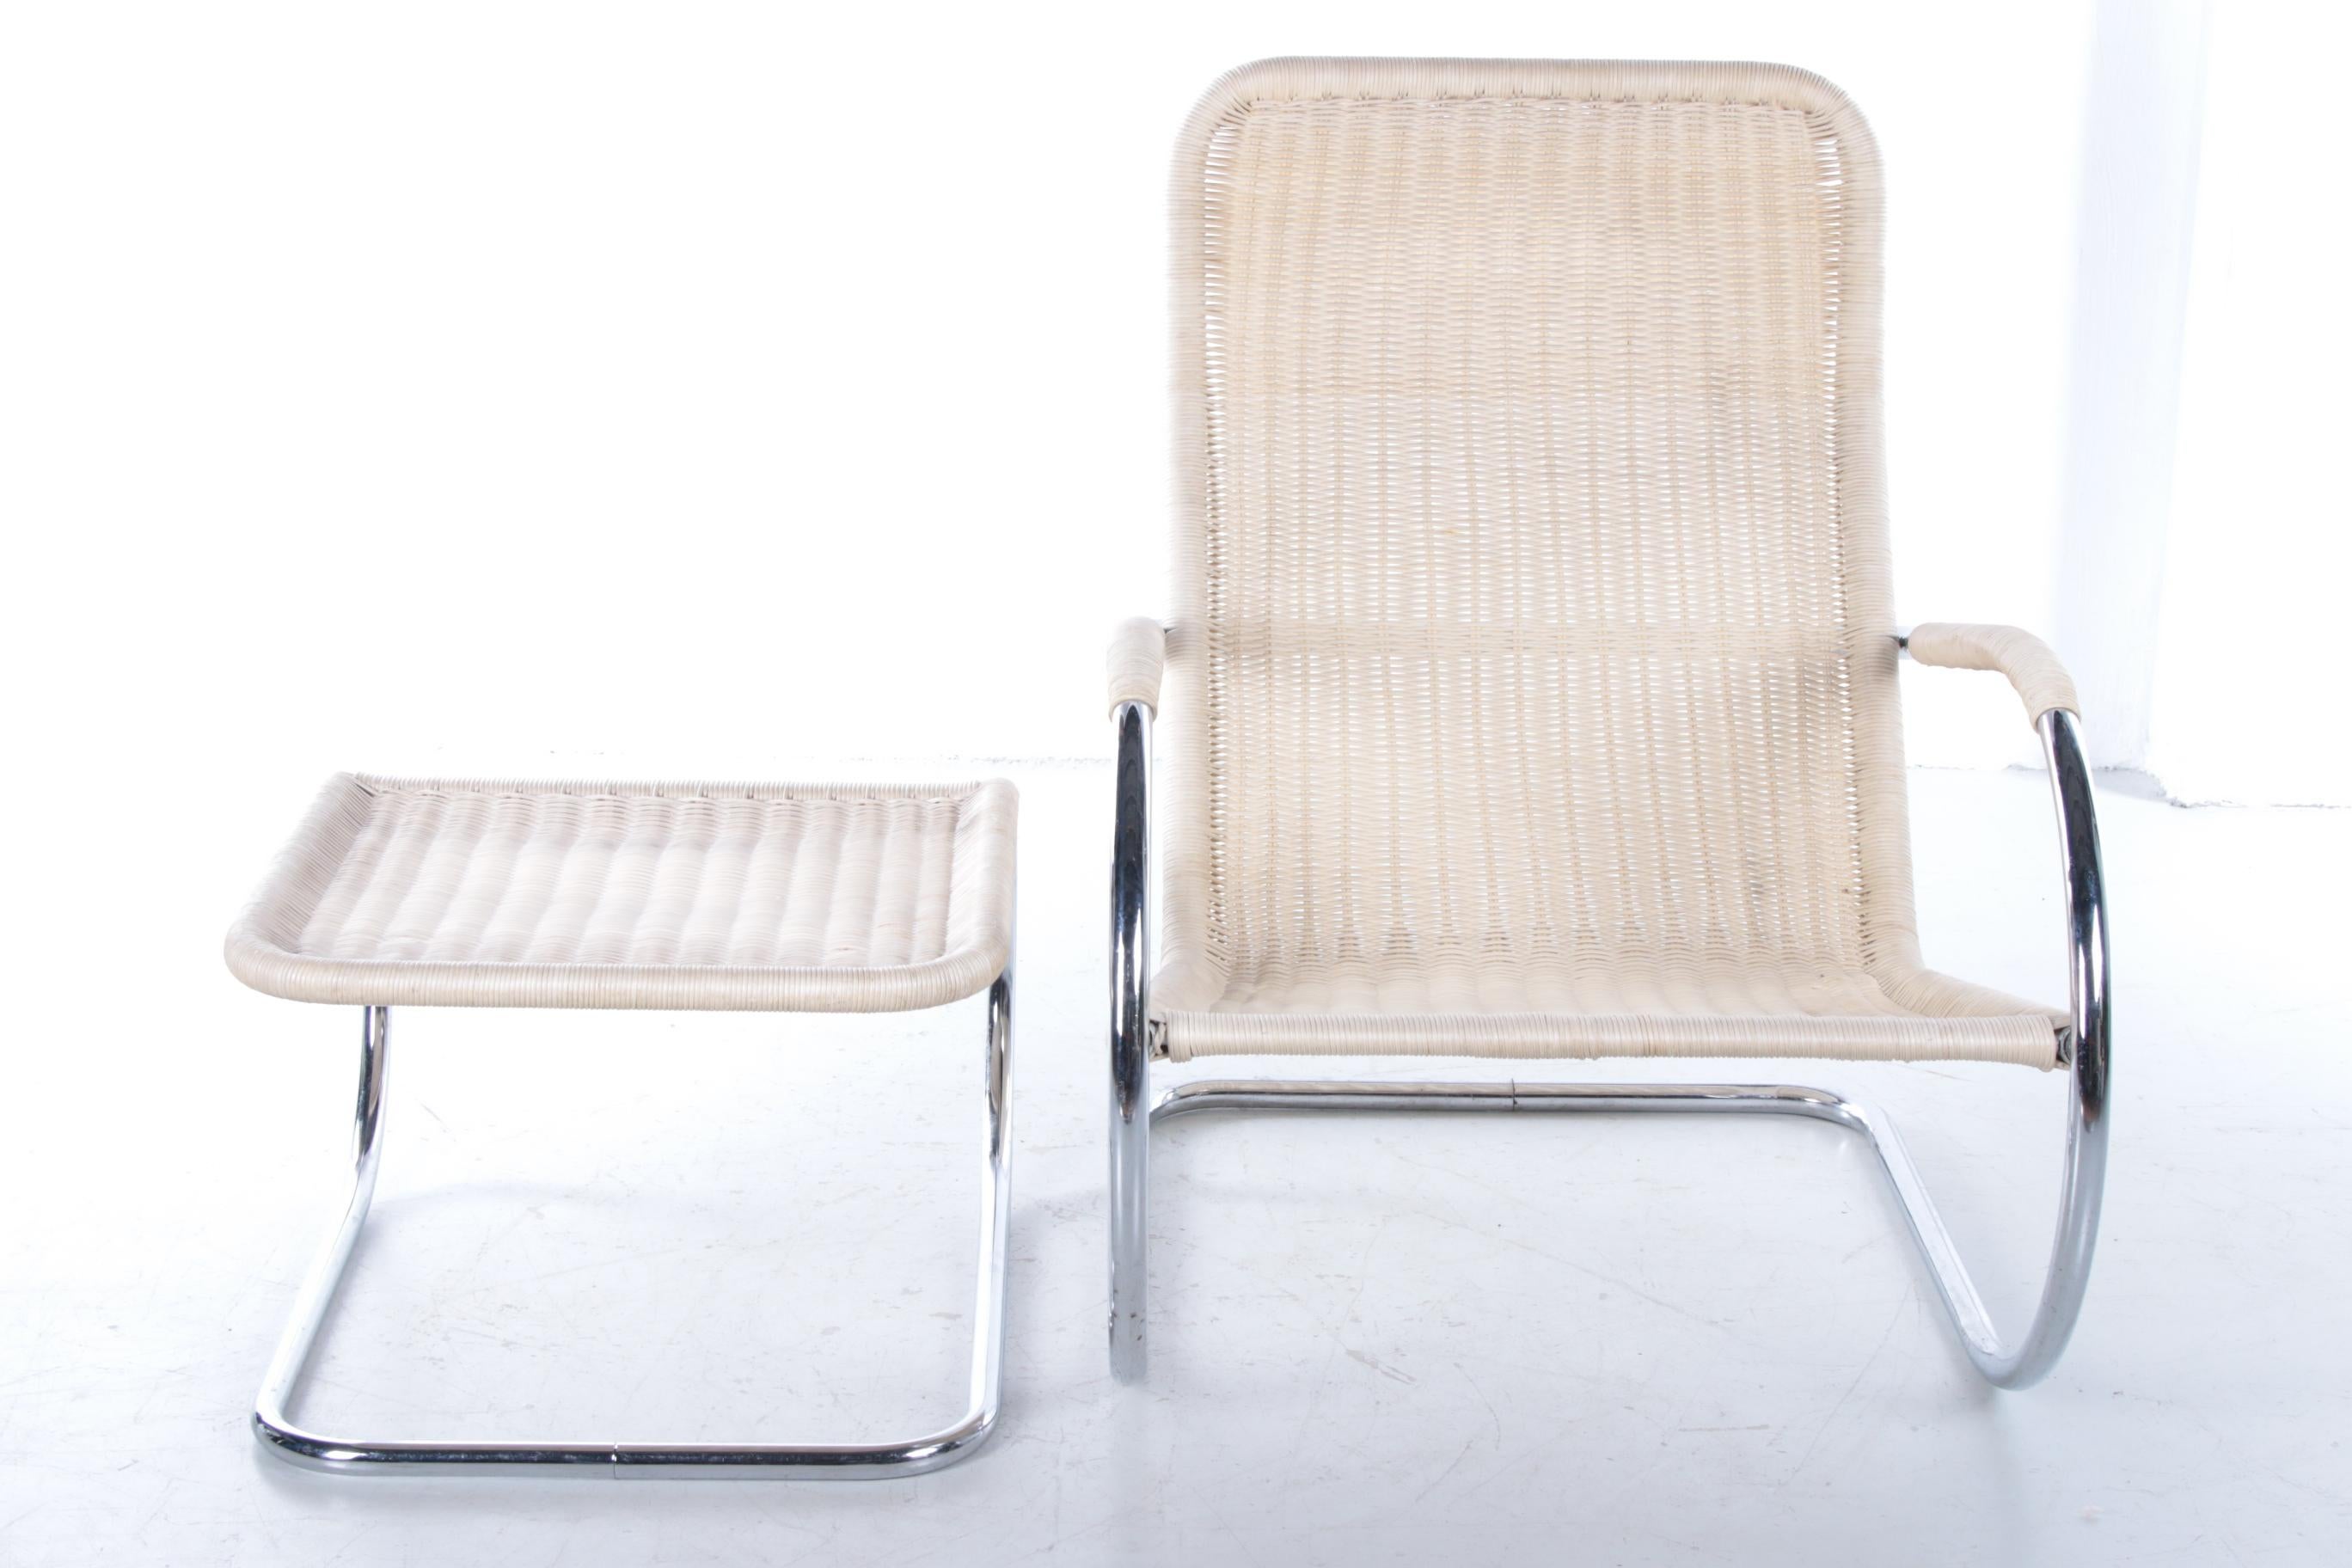 Late 20th Century Vintage Relax Chair with Ottoman from Tecta, Design by Anton Lorenz Germany